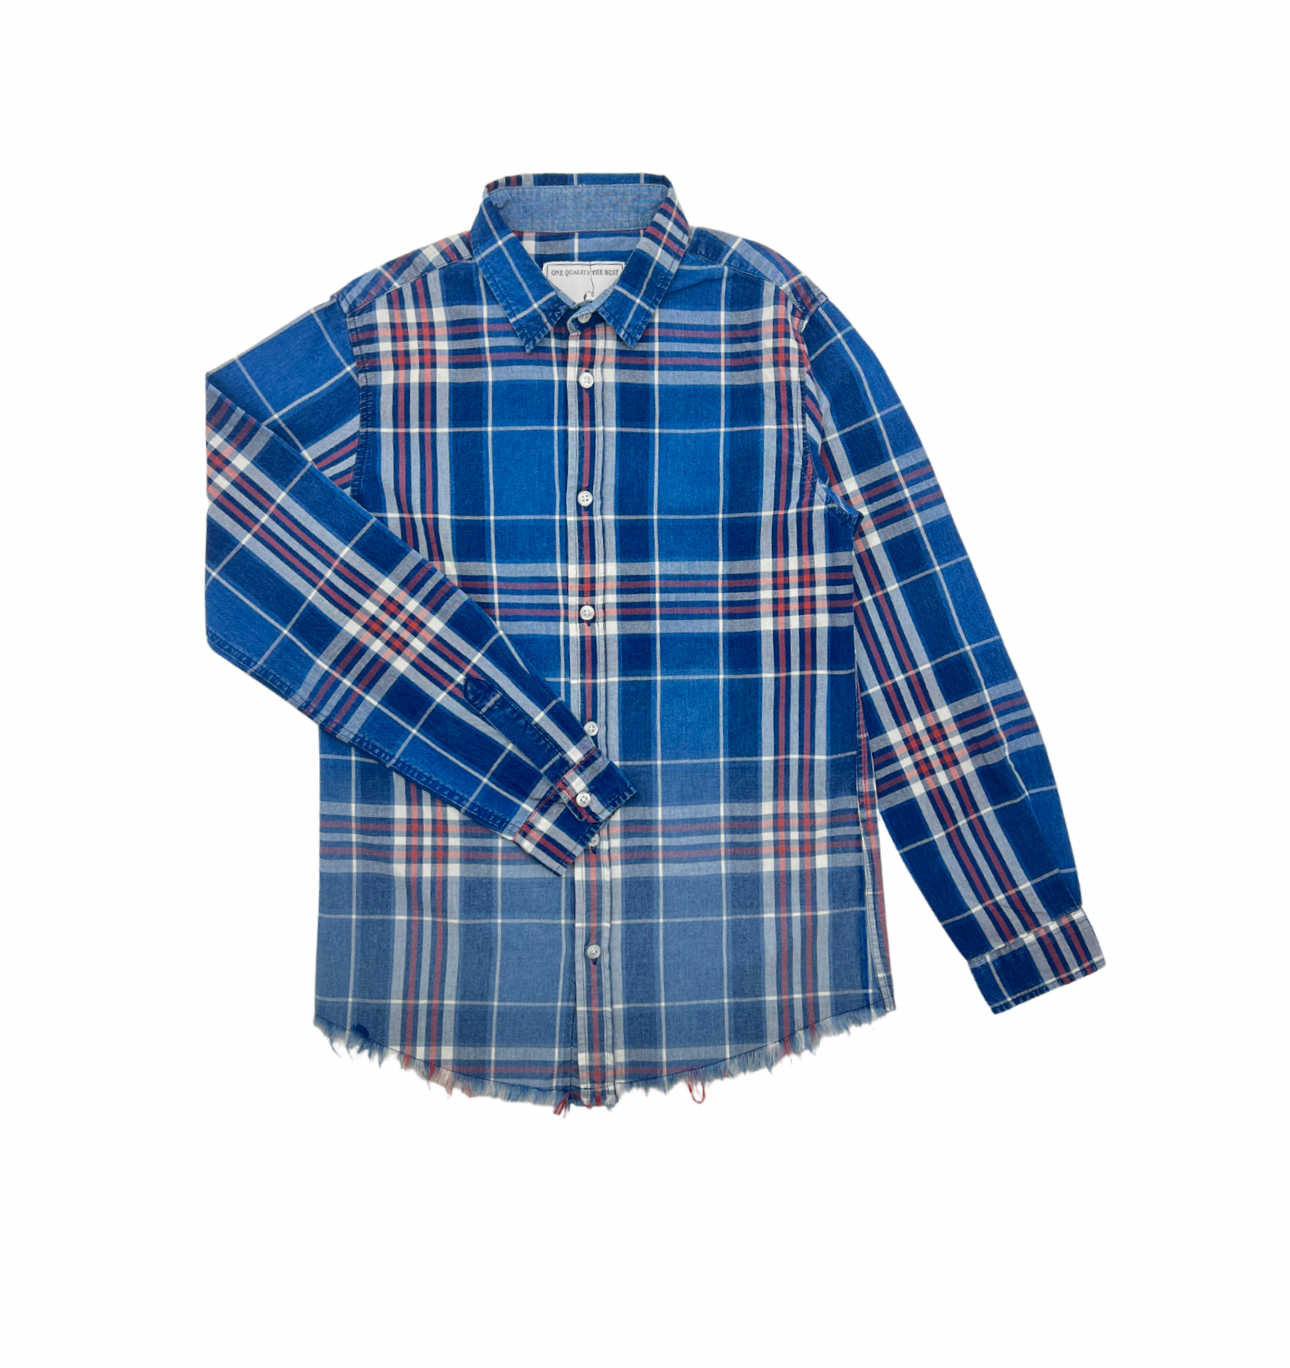 WHITE SAND - Faded checked shirt - 10 years